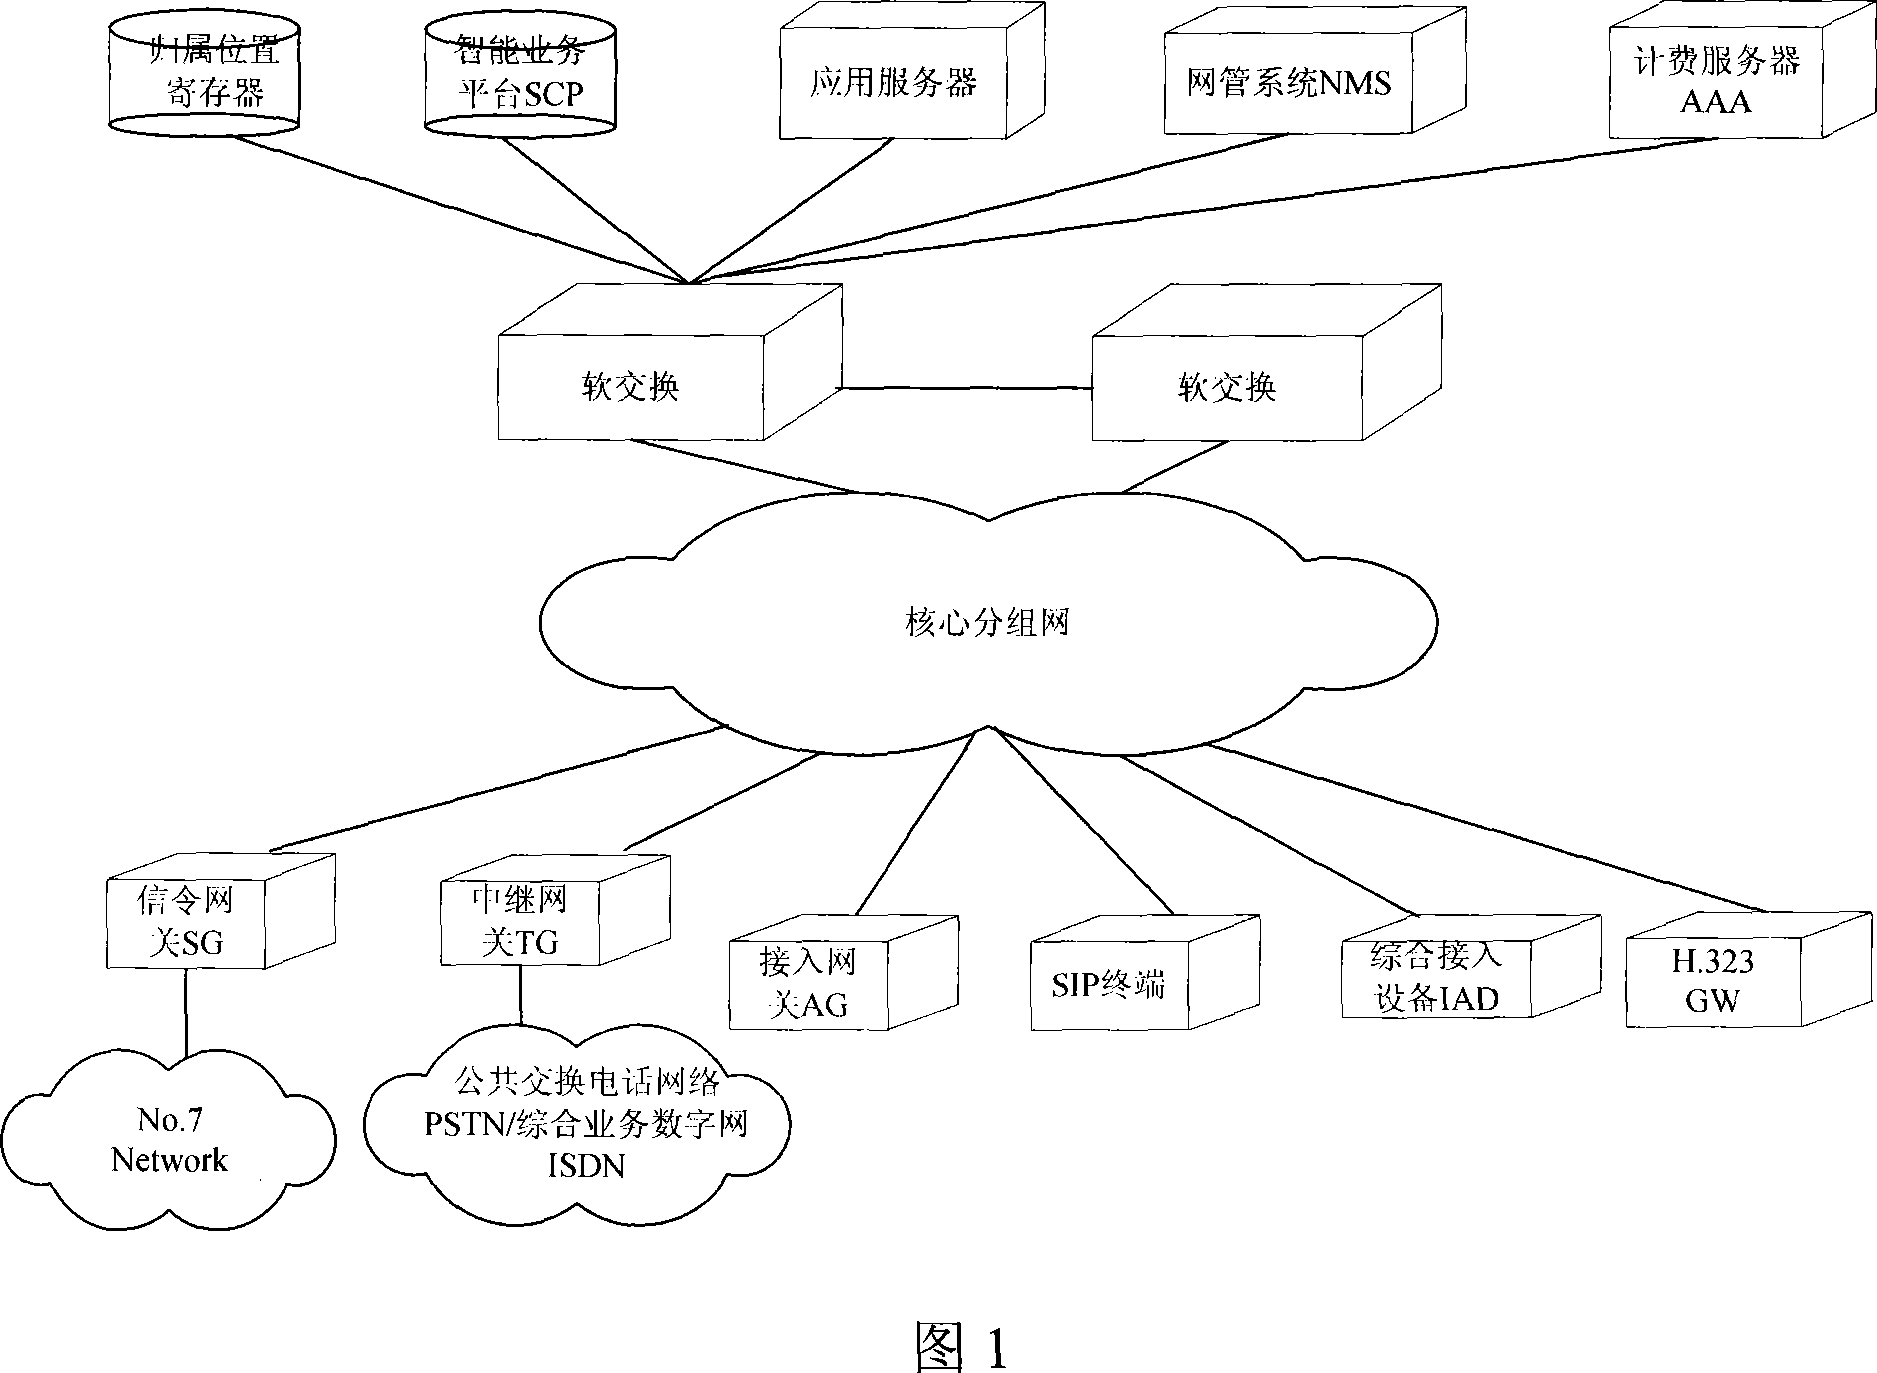 Implementing method for nesting intelligent service in broad band